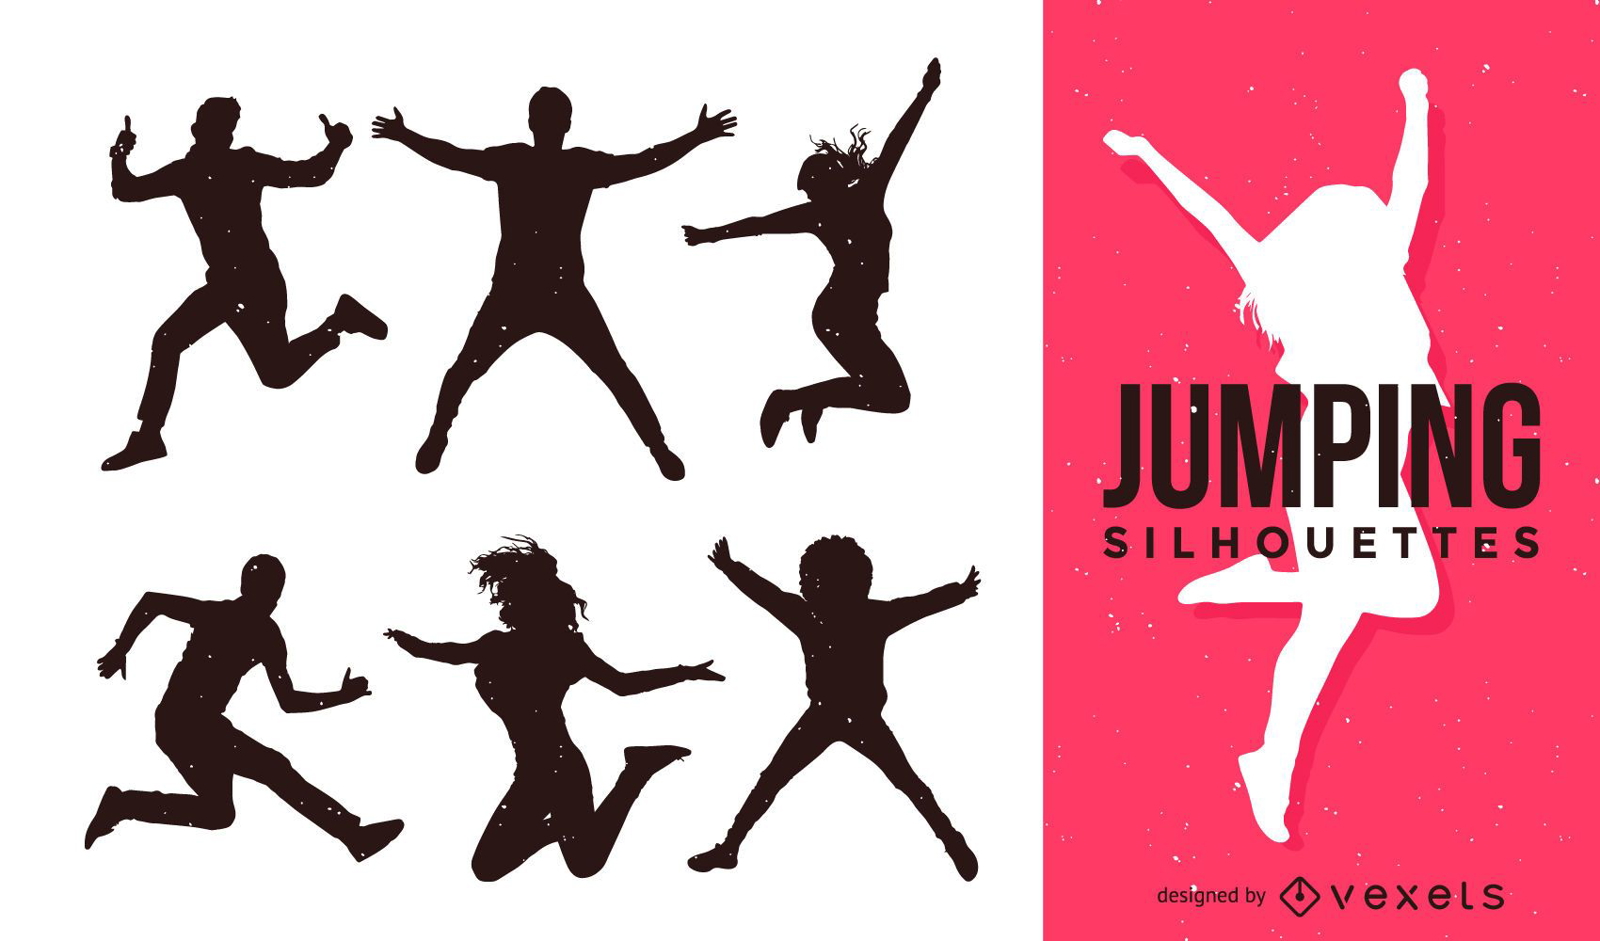 Set of people jumping silhouettes